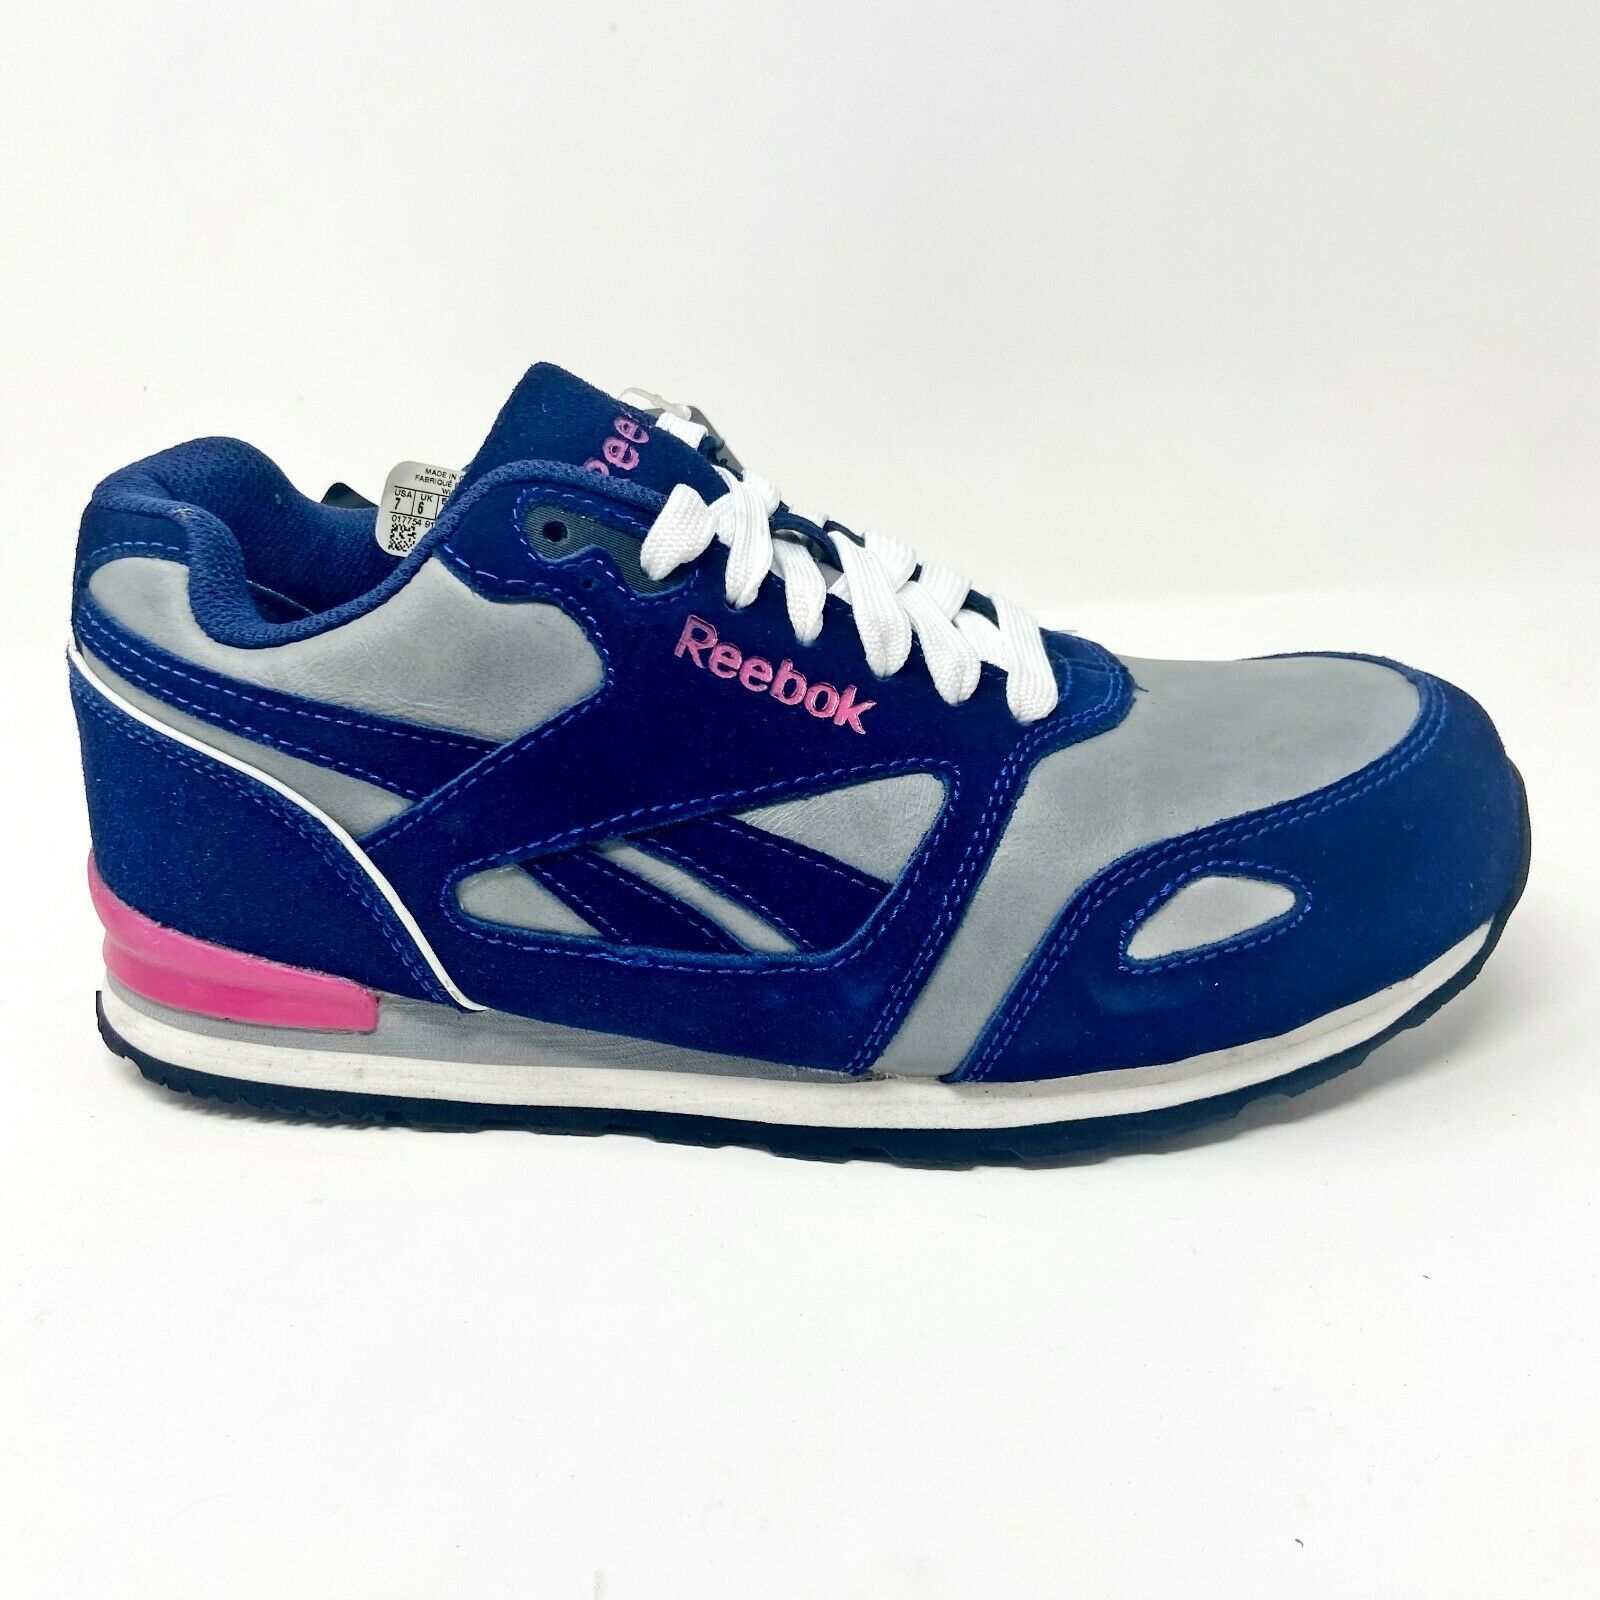 Primary image for Reebok Work Prelaris Blue Grey Pink Womens Size 7 Wide Composite Toe RB976